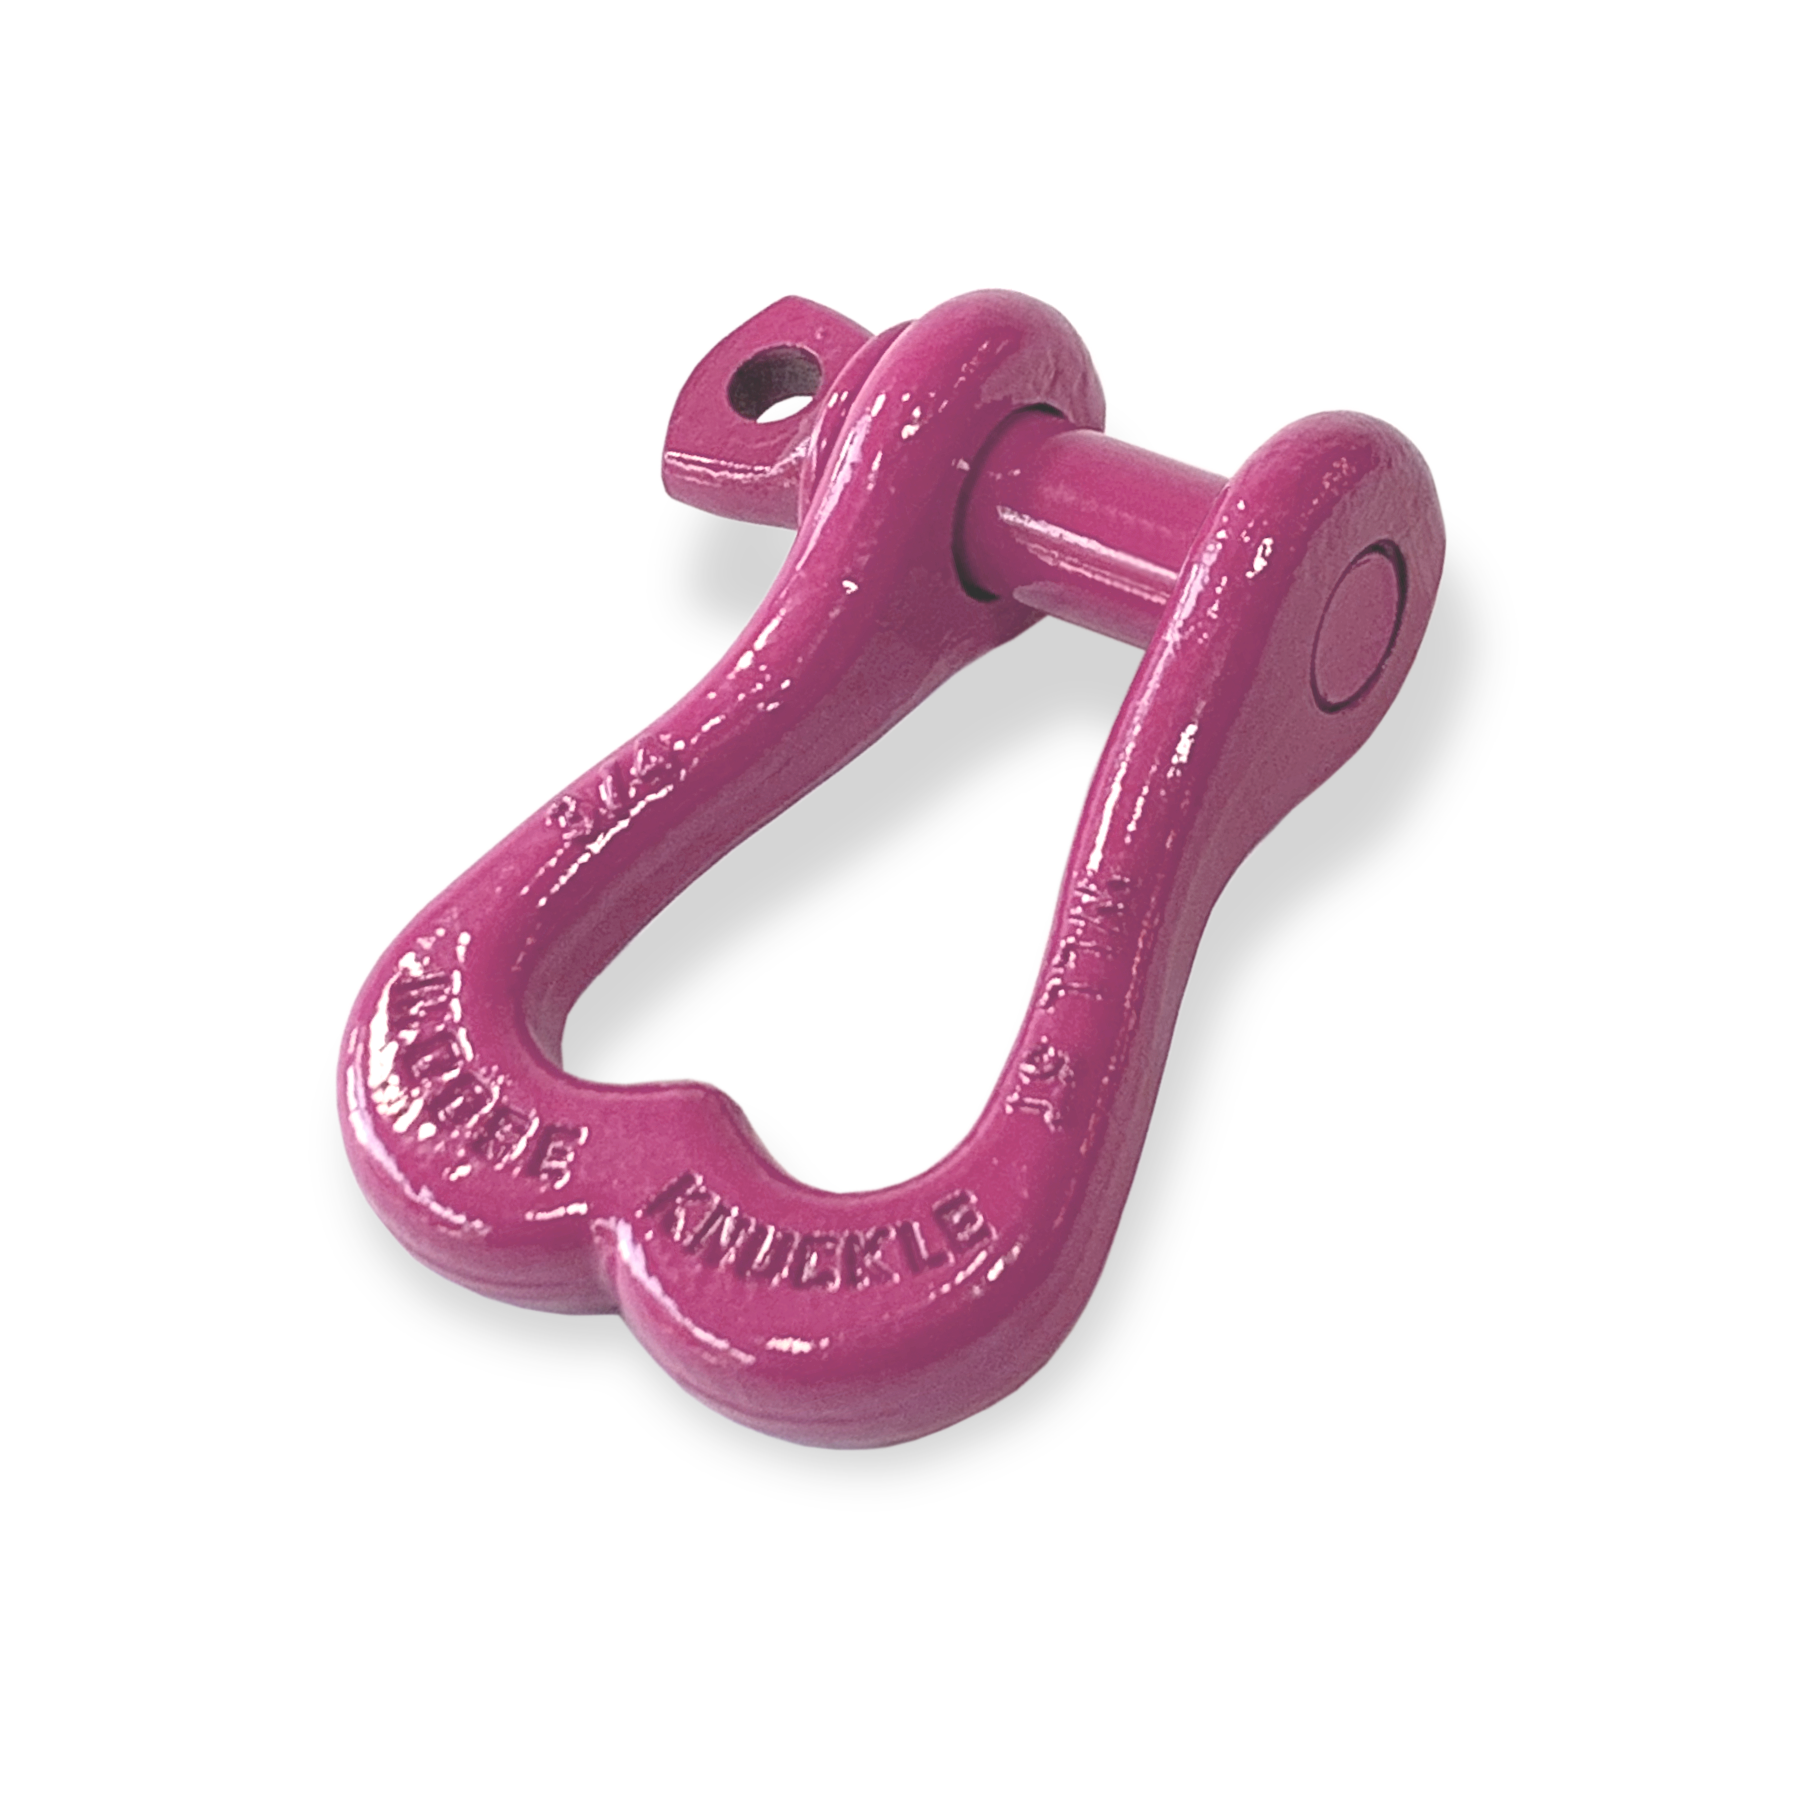 Moose Knuckle XL Pretty Pink Powder Coated Colored Shackle for Tow Straps, Off Roading and Truck Nuts Vehicle Recovery